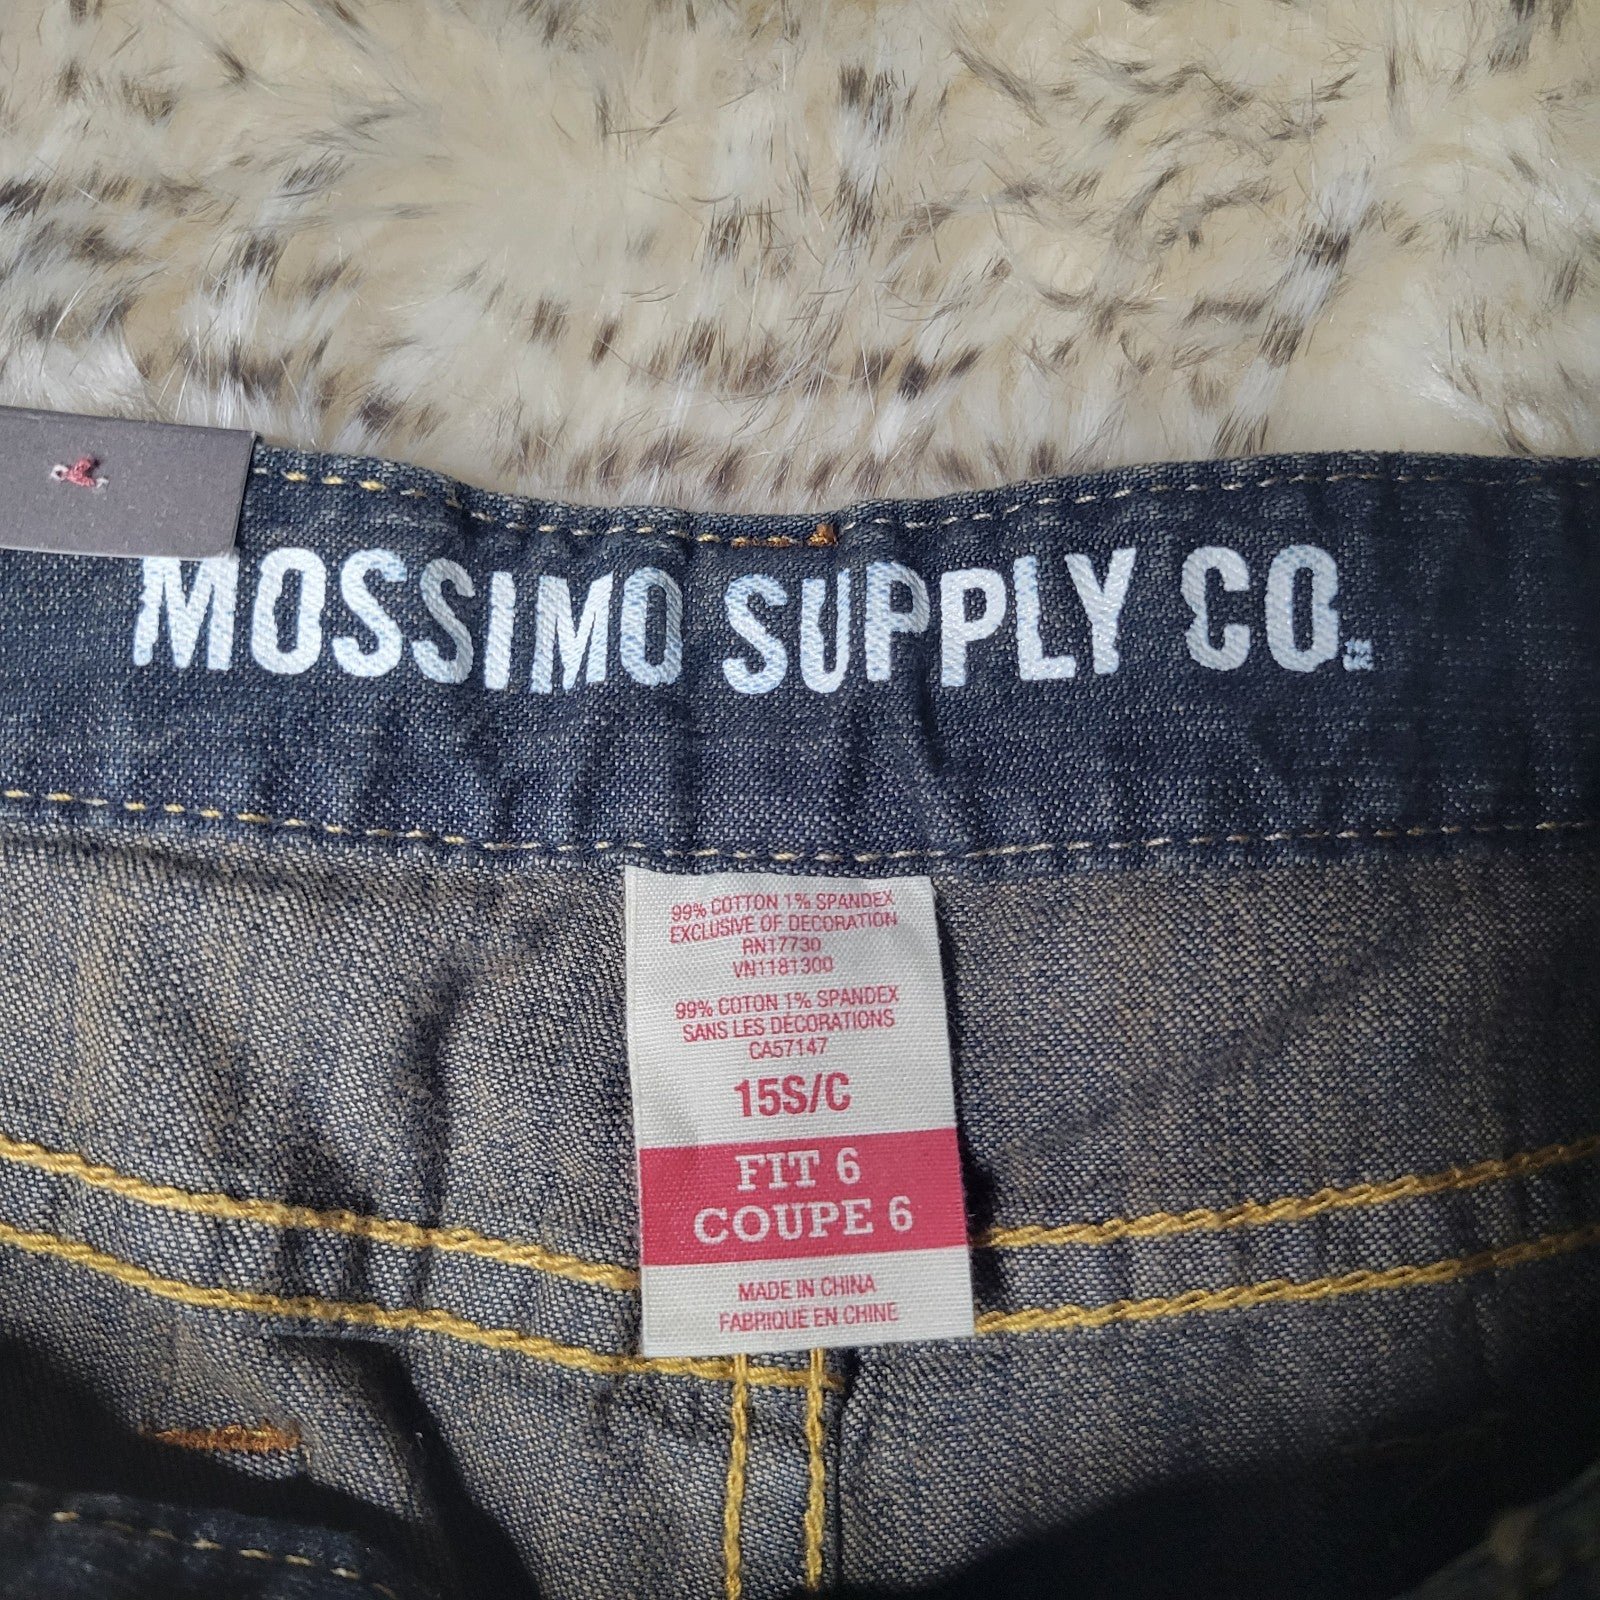 Buy Mossimo Supply Co. Bootcut jeans size 15S LG4KV2CjQ no tax